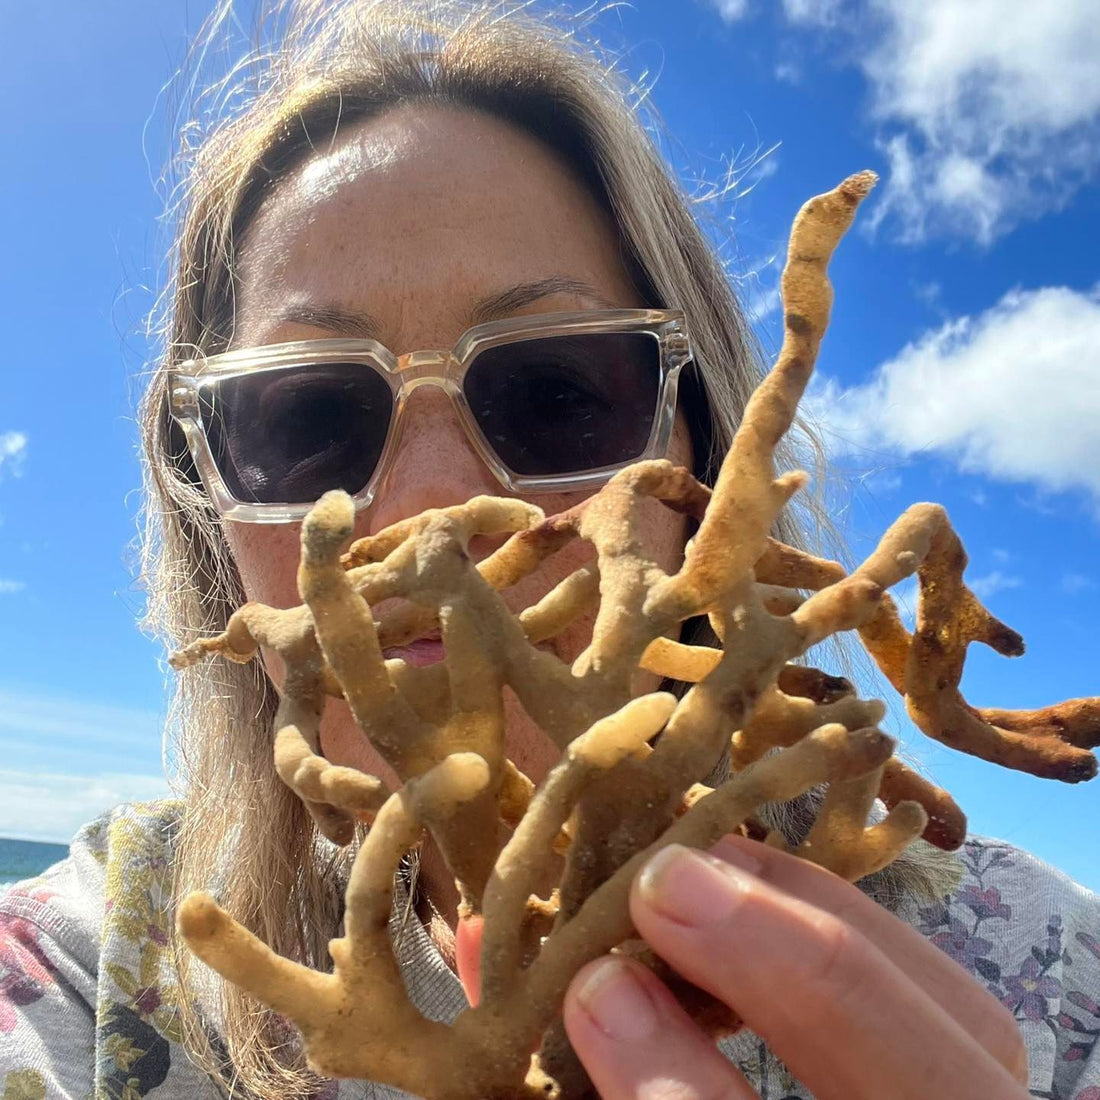 Yesterday’s session at Taupo Bay started with some coral beachcombing